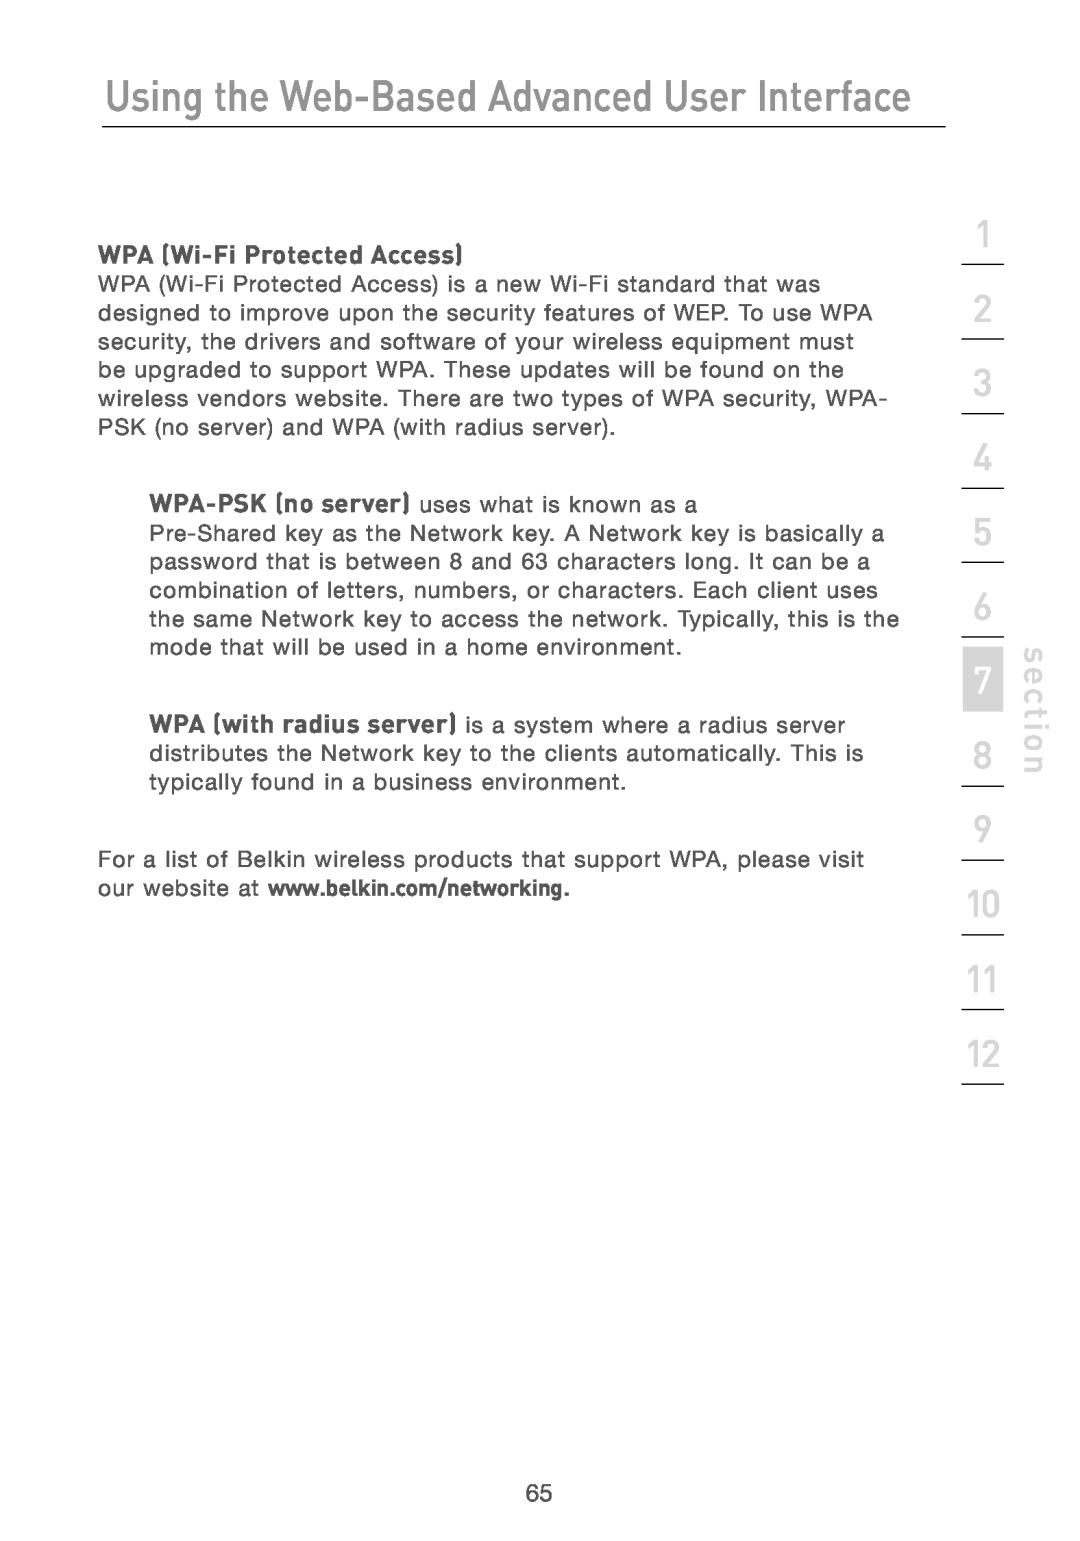 Belkin F5D7230AU4P user manual WPA Wi-Fi Protected Access, Using the Web-Based Advanced User Interface, section 